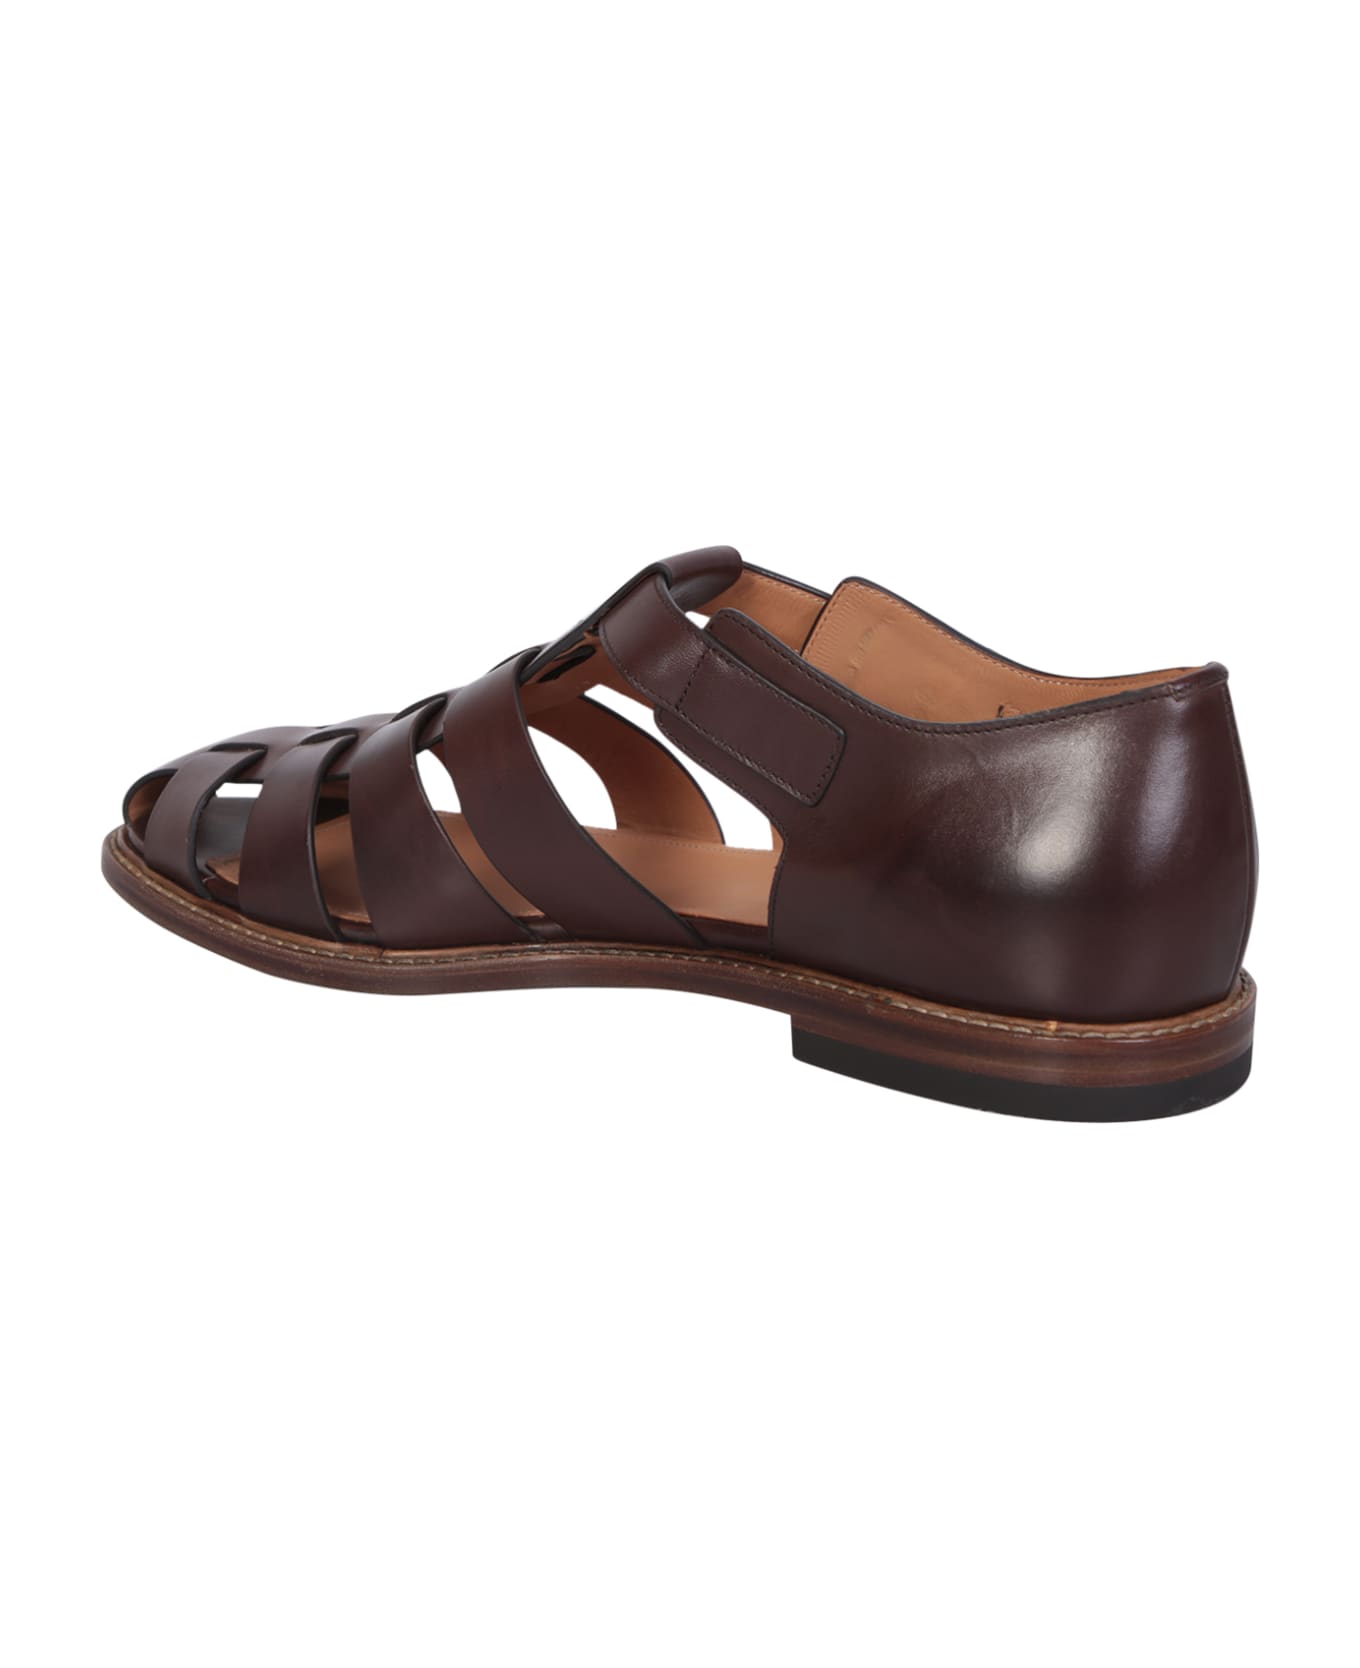 Church's Brown Fisherman Sandals - Brown その他各種シューズ